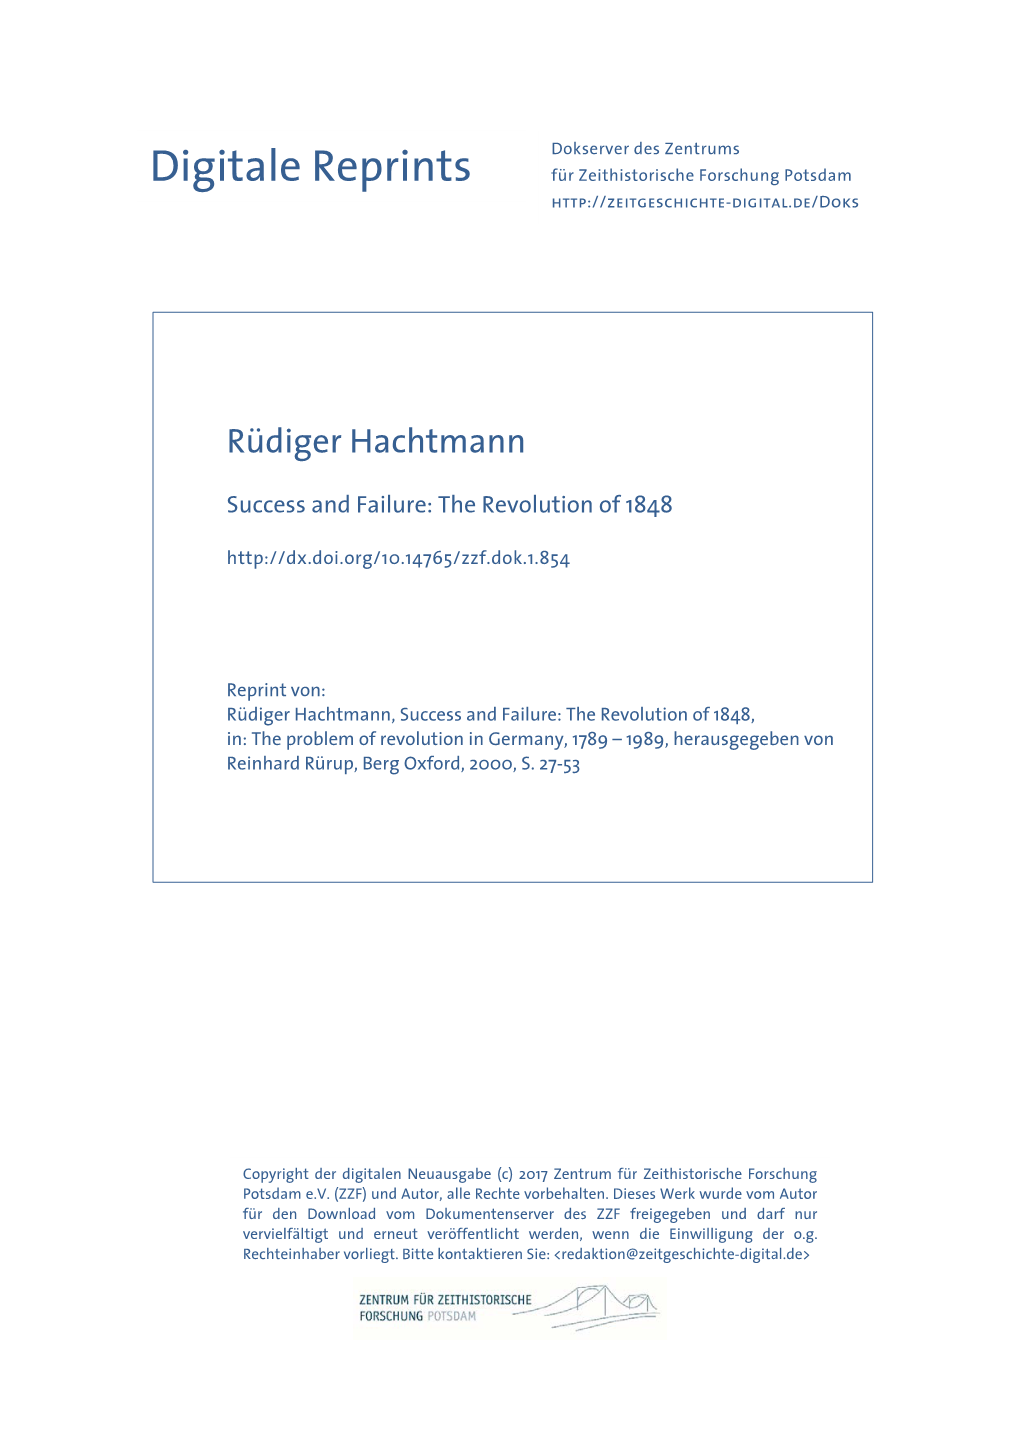 Rüdiger Hachtmann, Success and Failure: The